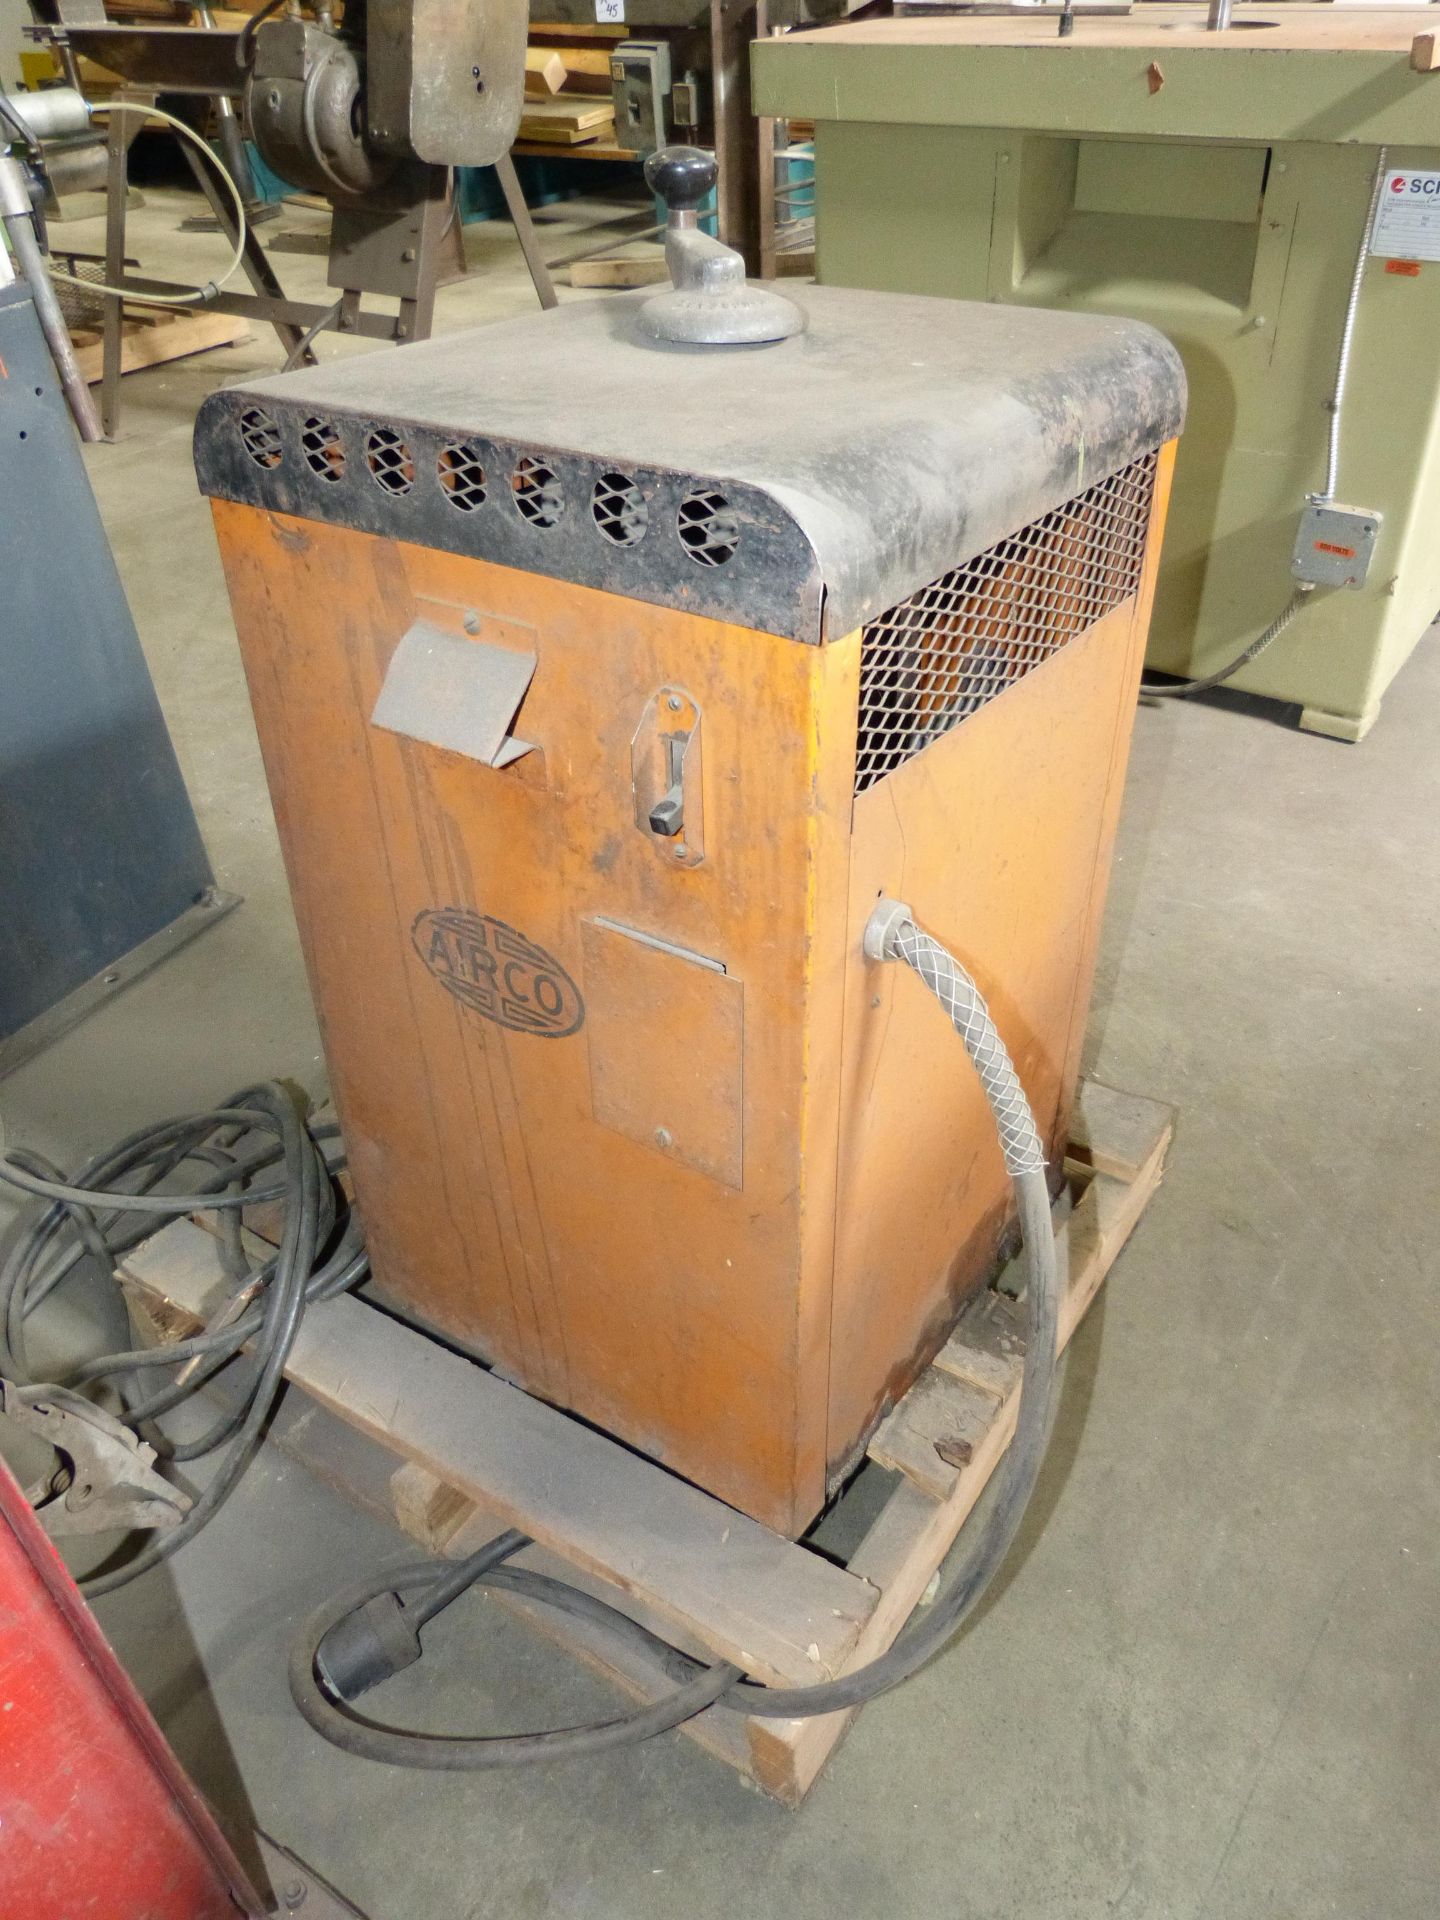 AIRCO 300 AMP STICK ARC WELDER - Image 4 of 5